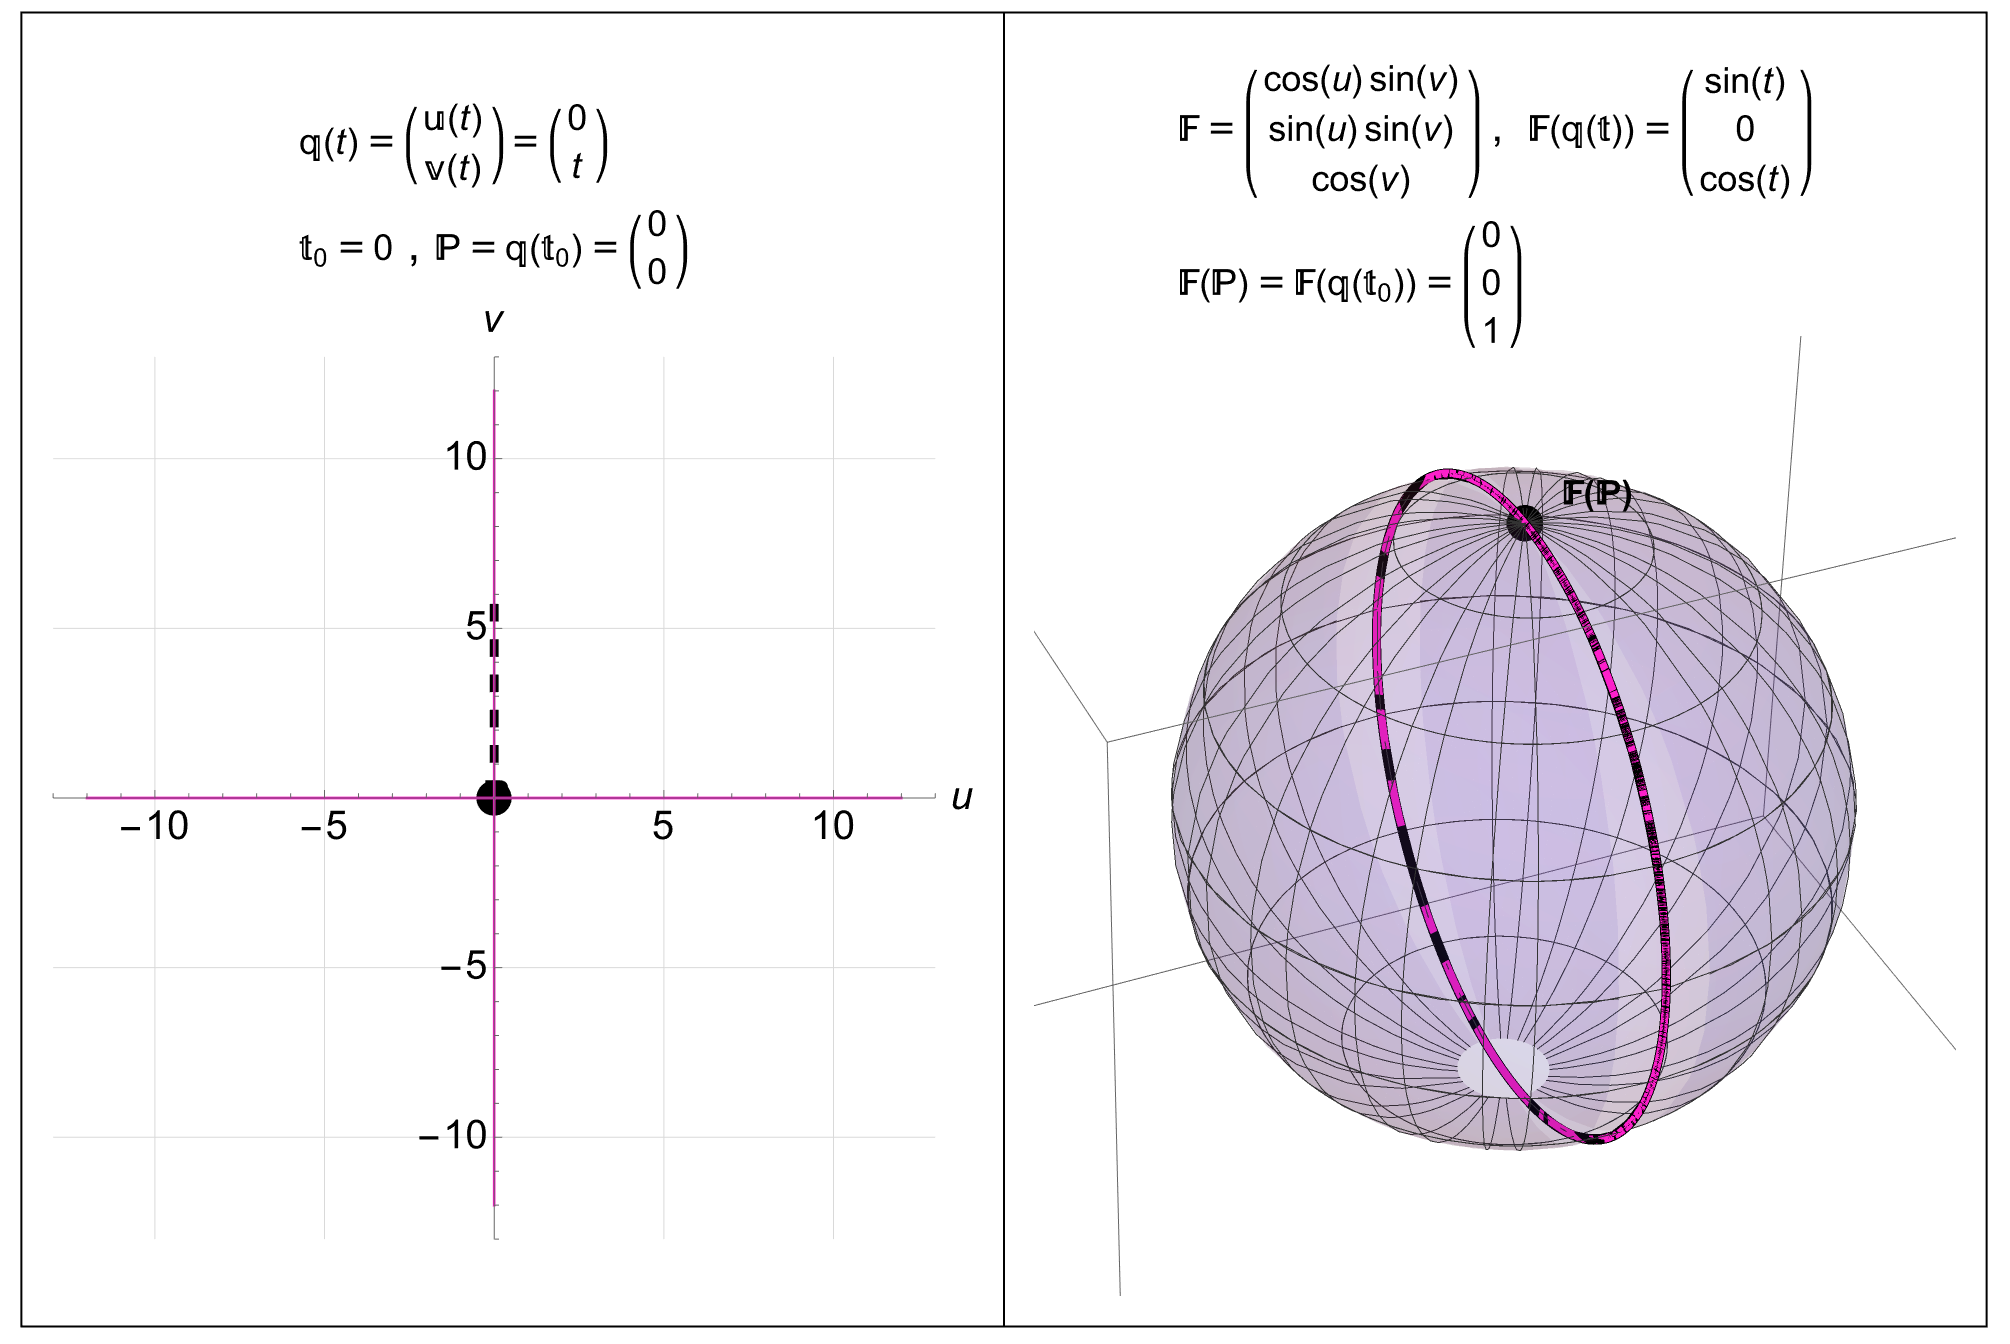 Mapping the Prime Meridian in Coordinate Space to Real 3D Space: A point \(P=(0,0)\) in 2D coordinate space maps to the point \(F^{i}(P)=(0,0,1)\) in 3D space. The black line \(q^{\alpha}(t)=(t,\pi/2)\) in coordinate space goes through the point \(P\) at time \(t=0\) and maps to the black curve in 3D space \(F^{i}(q^{\alpha}(t))=(\cos(t),\sin(t),0)\) (the Prime Meridian). We are also seeing the two pink coordinate lines through \(P\) mapped onto the surface as the two pink curves (one of the pink curves is a single point at the North Pole.